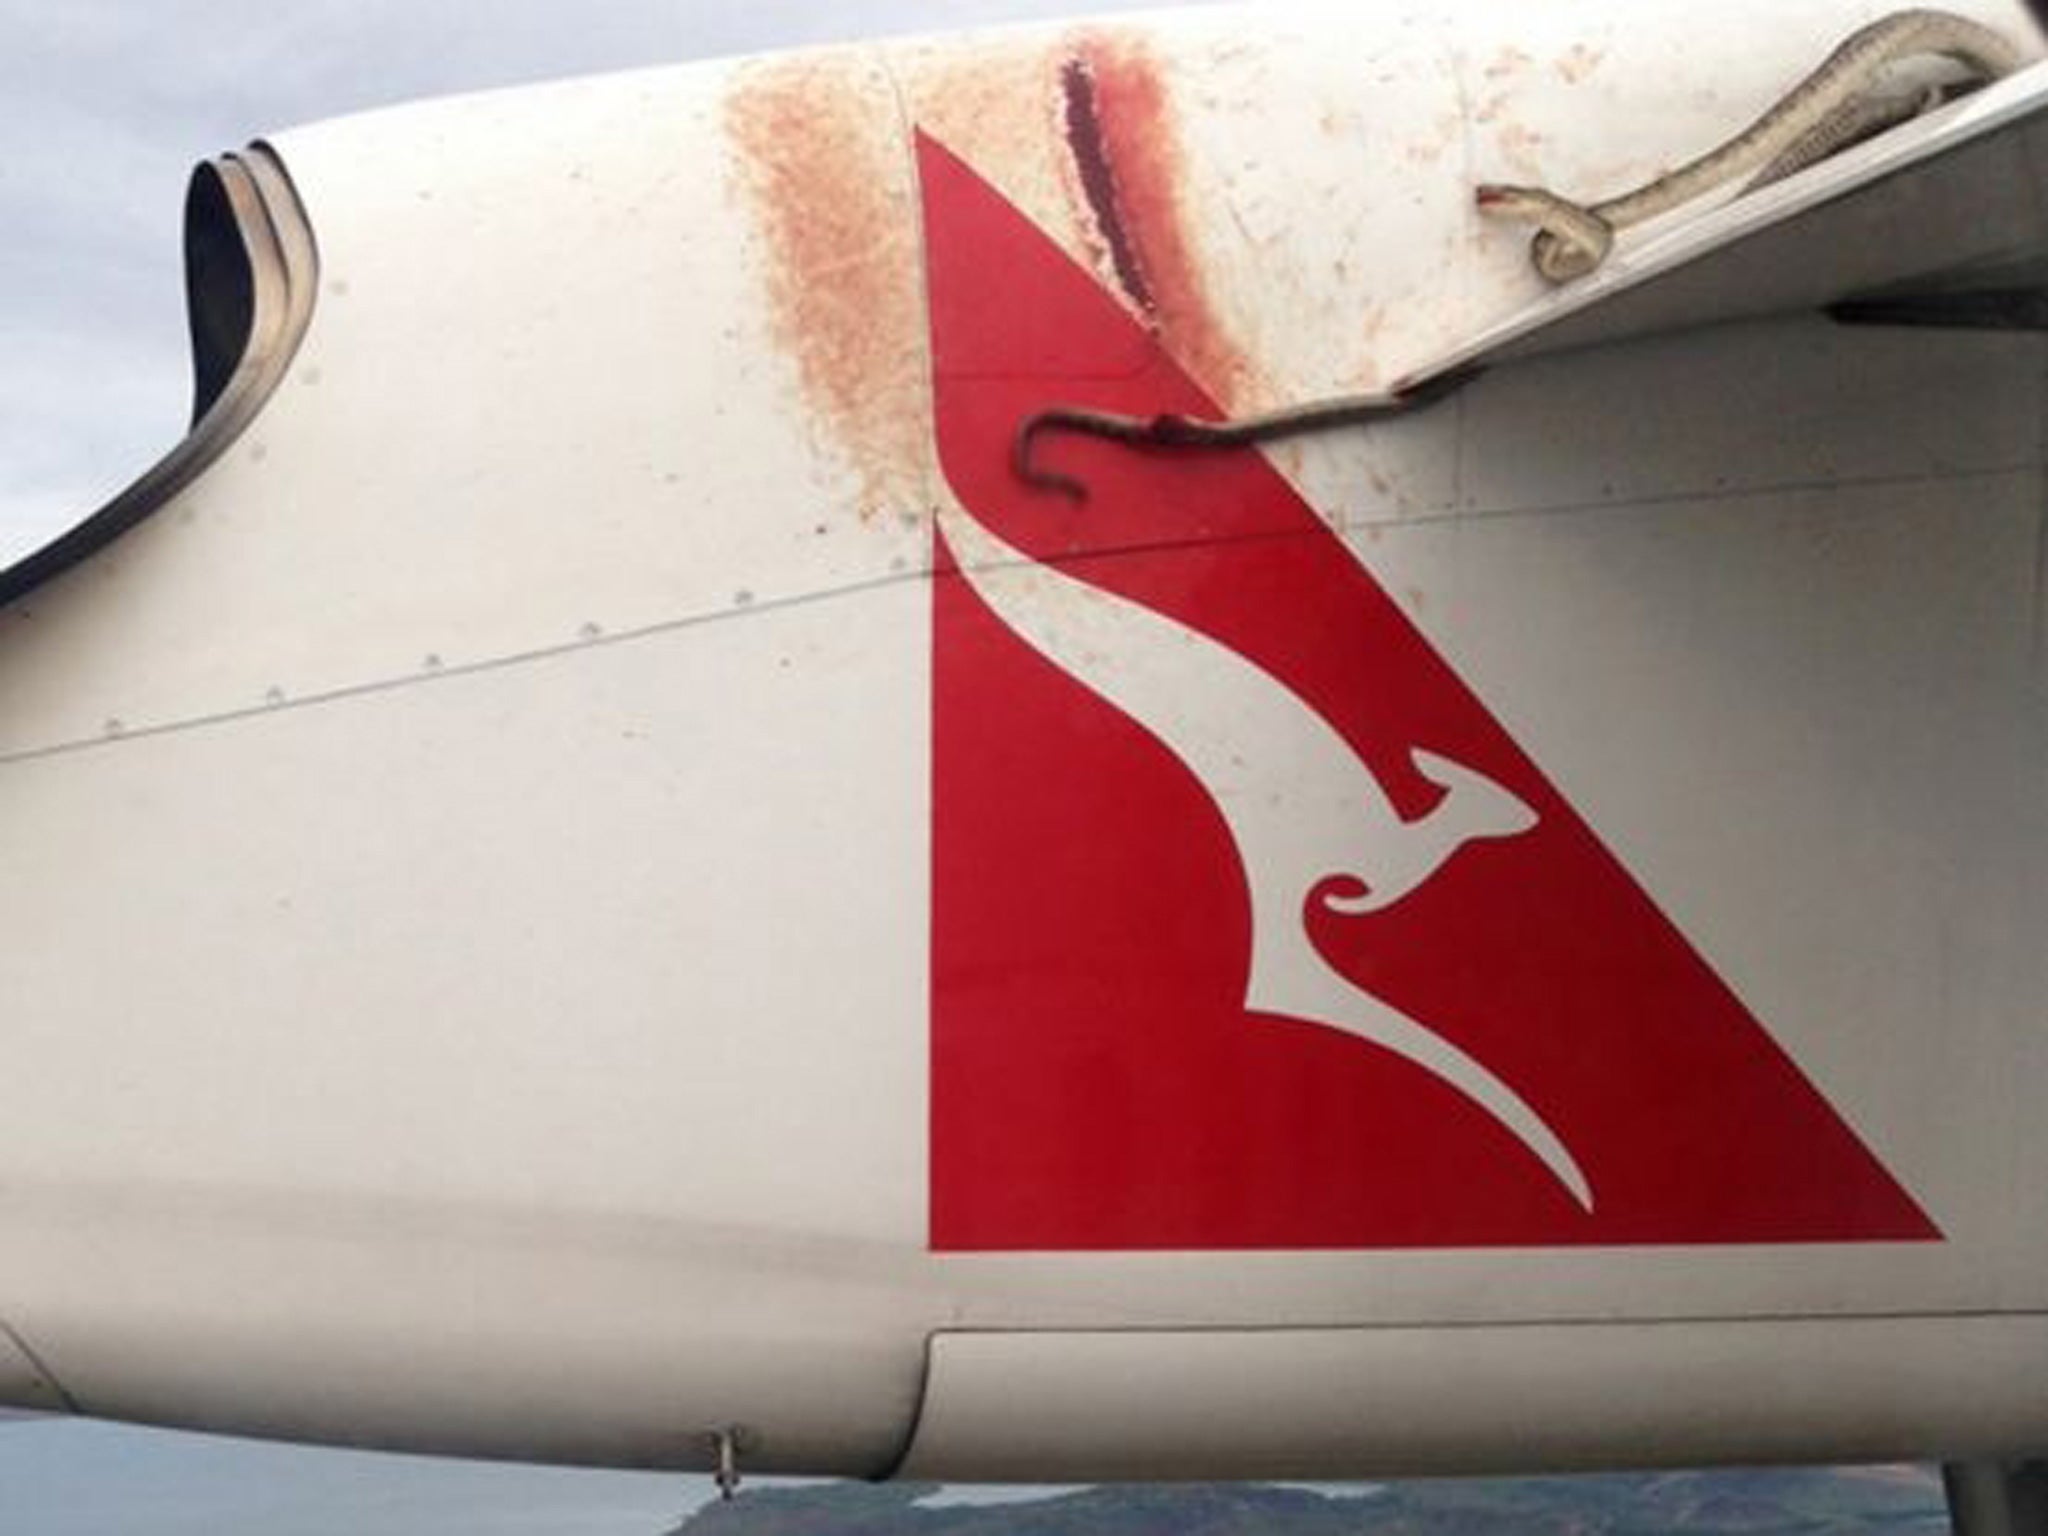 A python lies wedged on the wing of a Qantas passenger plan as it flies over Port Moresby